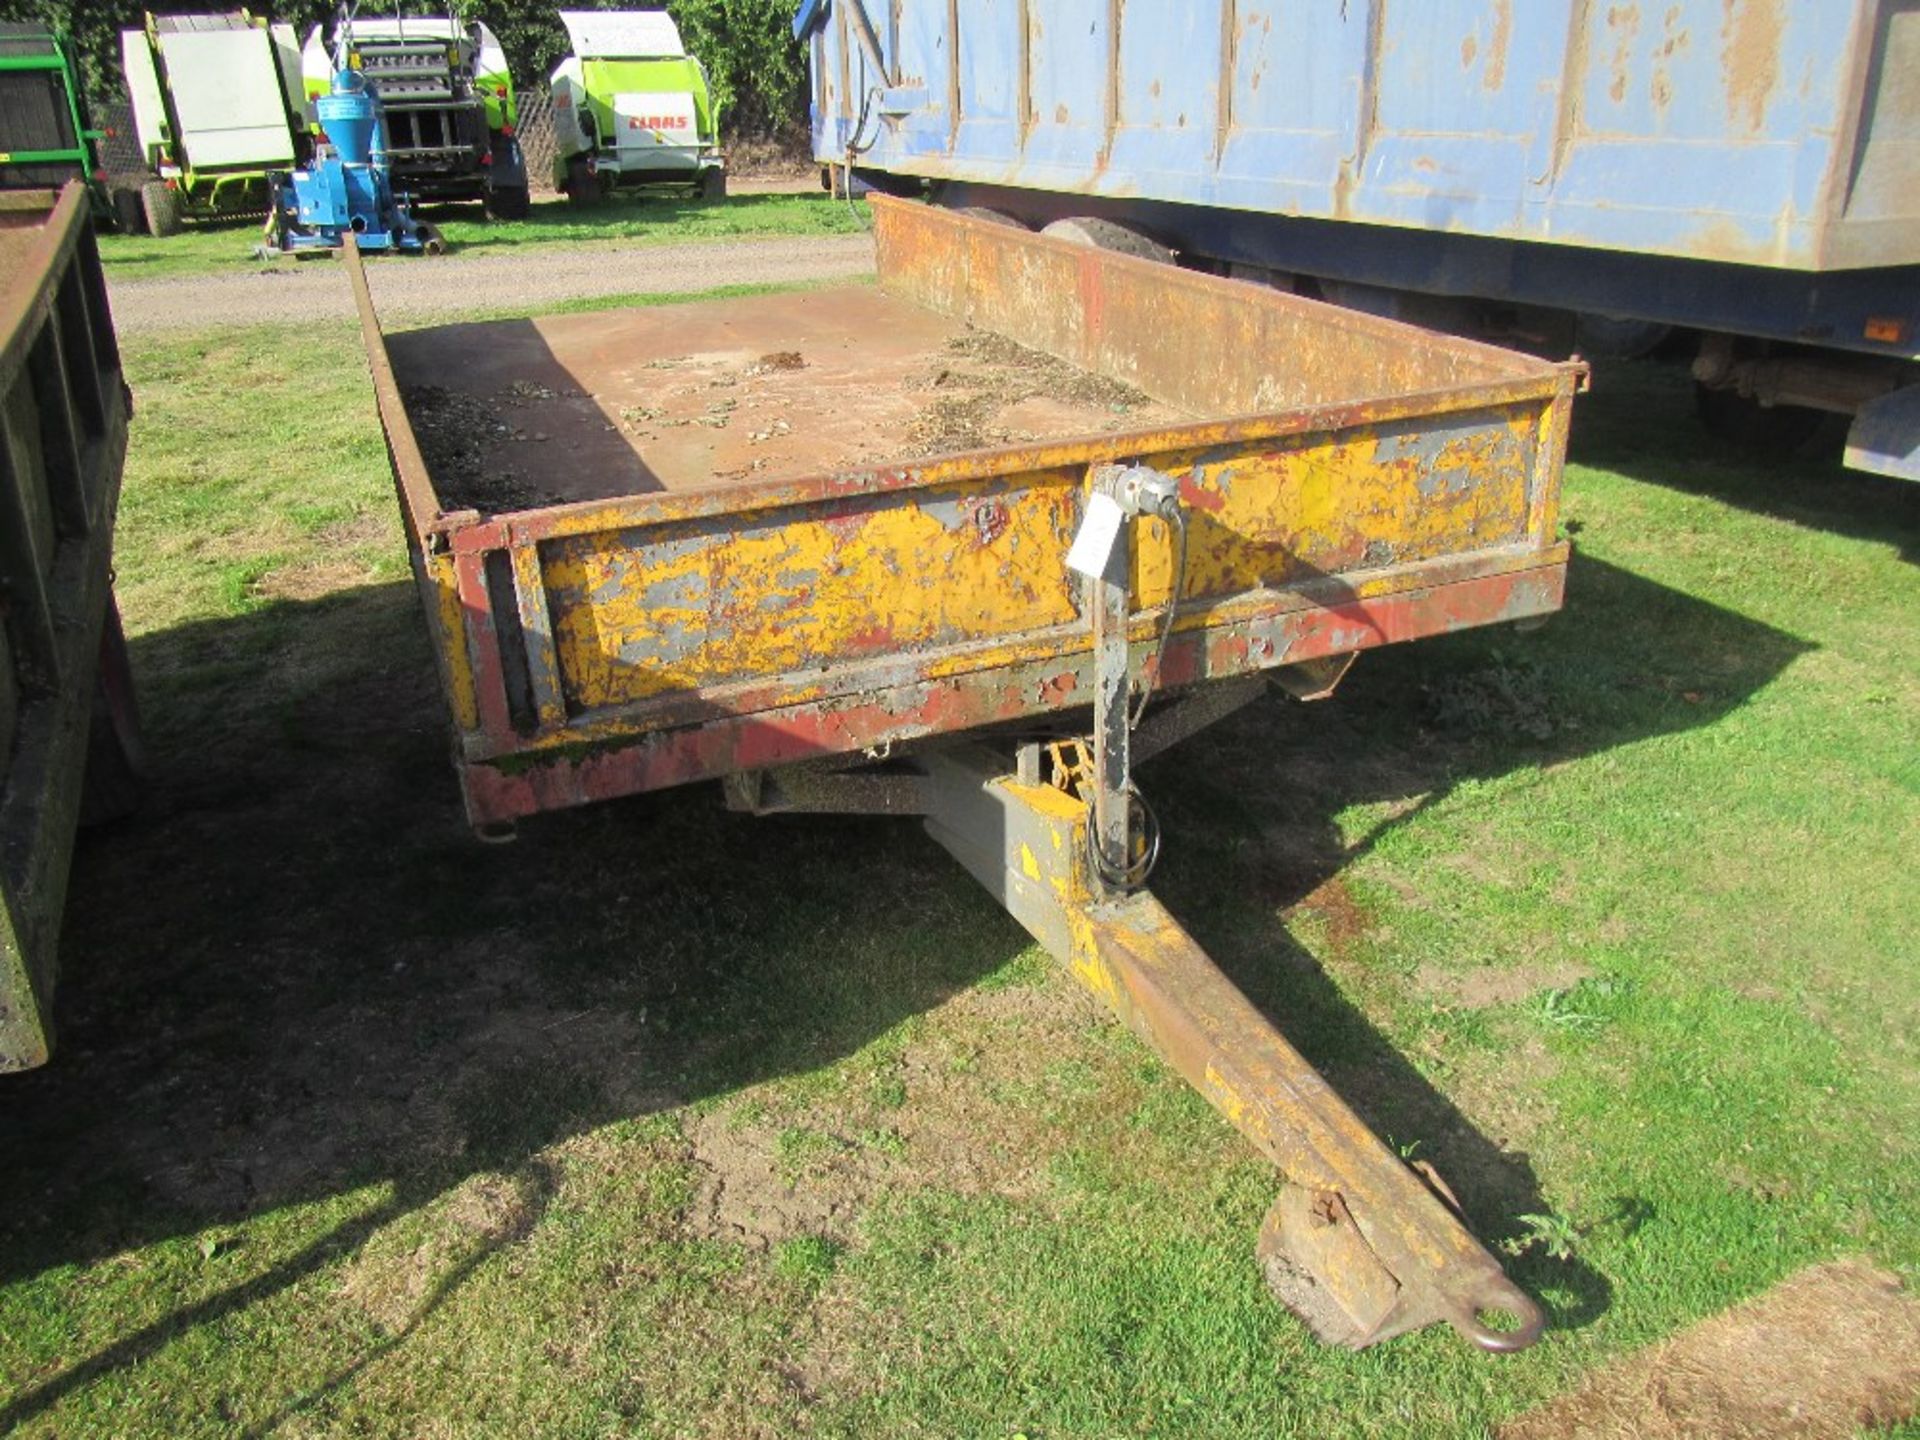 3 Ton Flat Trailer with Steel Sides. Yellow